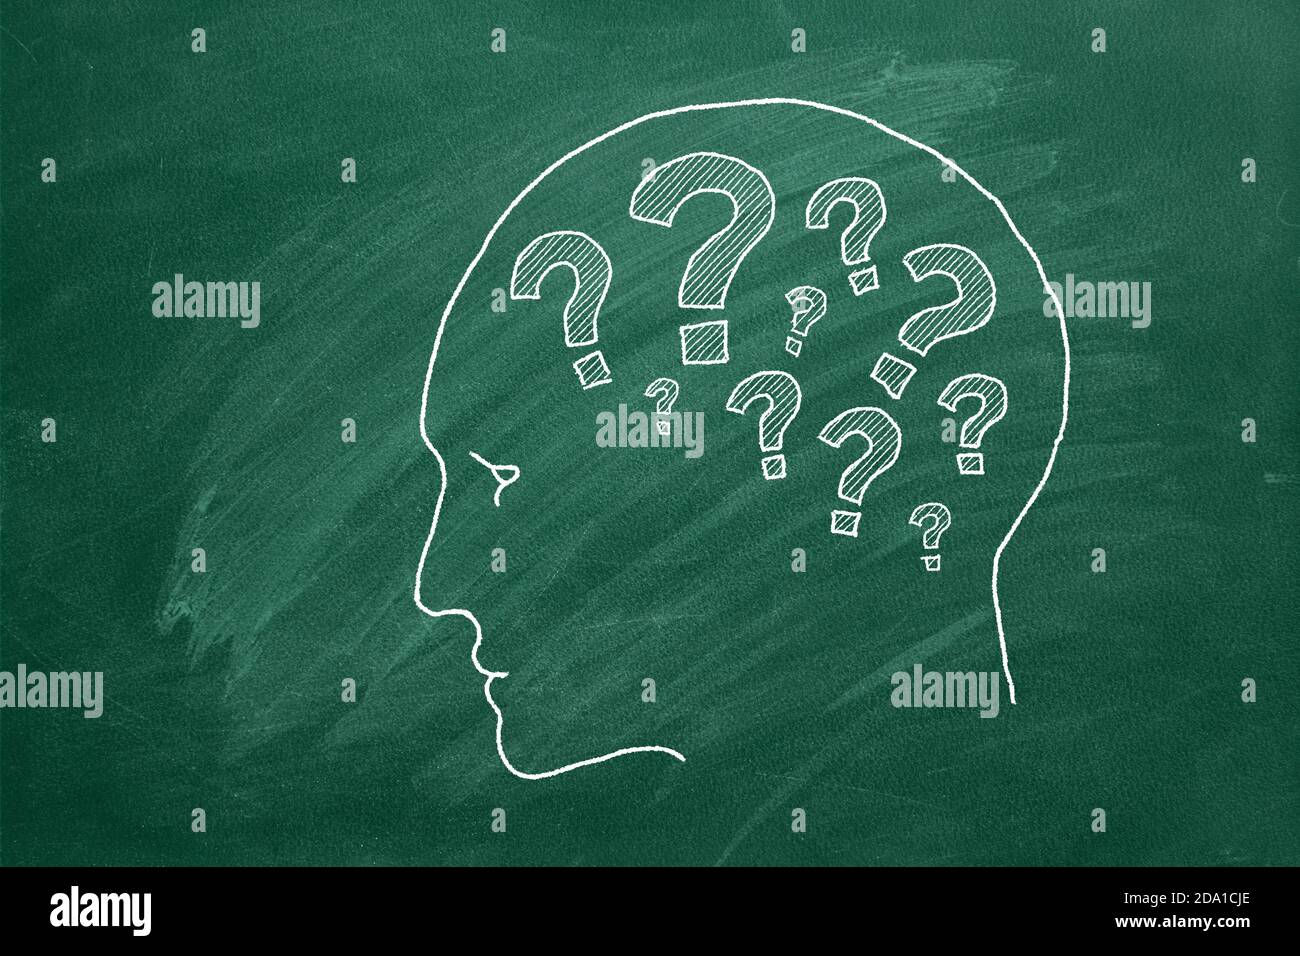 Human head with question marks inside. Animated illustration on green chalkboard. Stock Photo